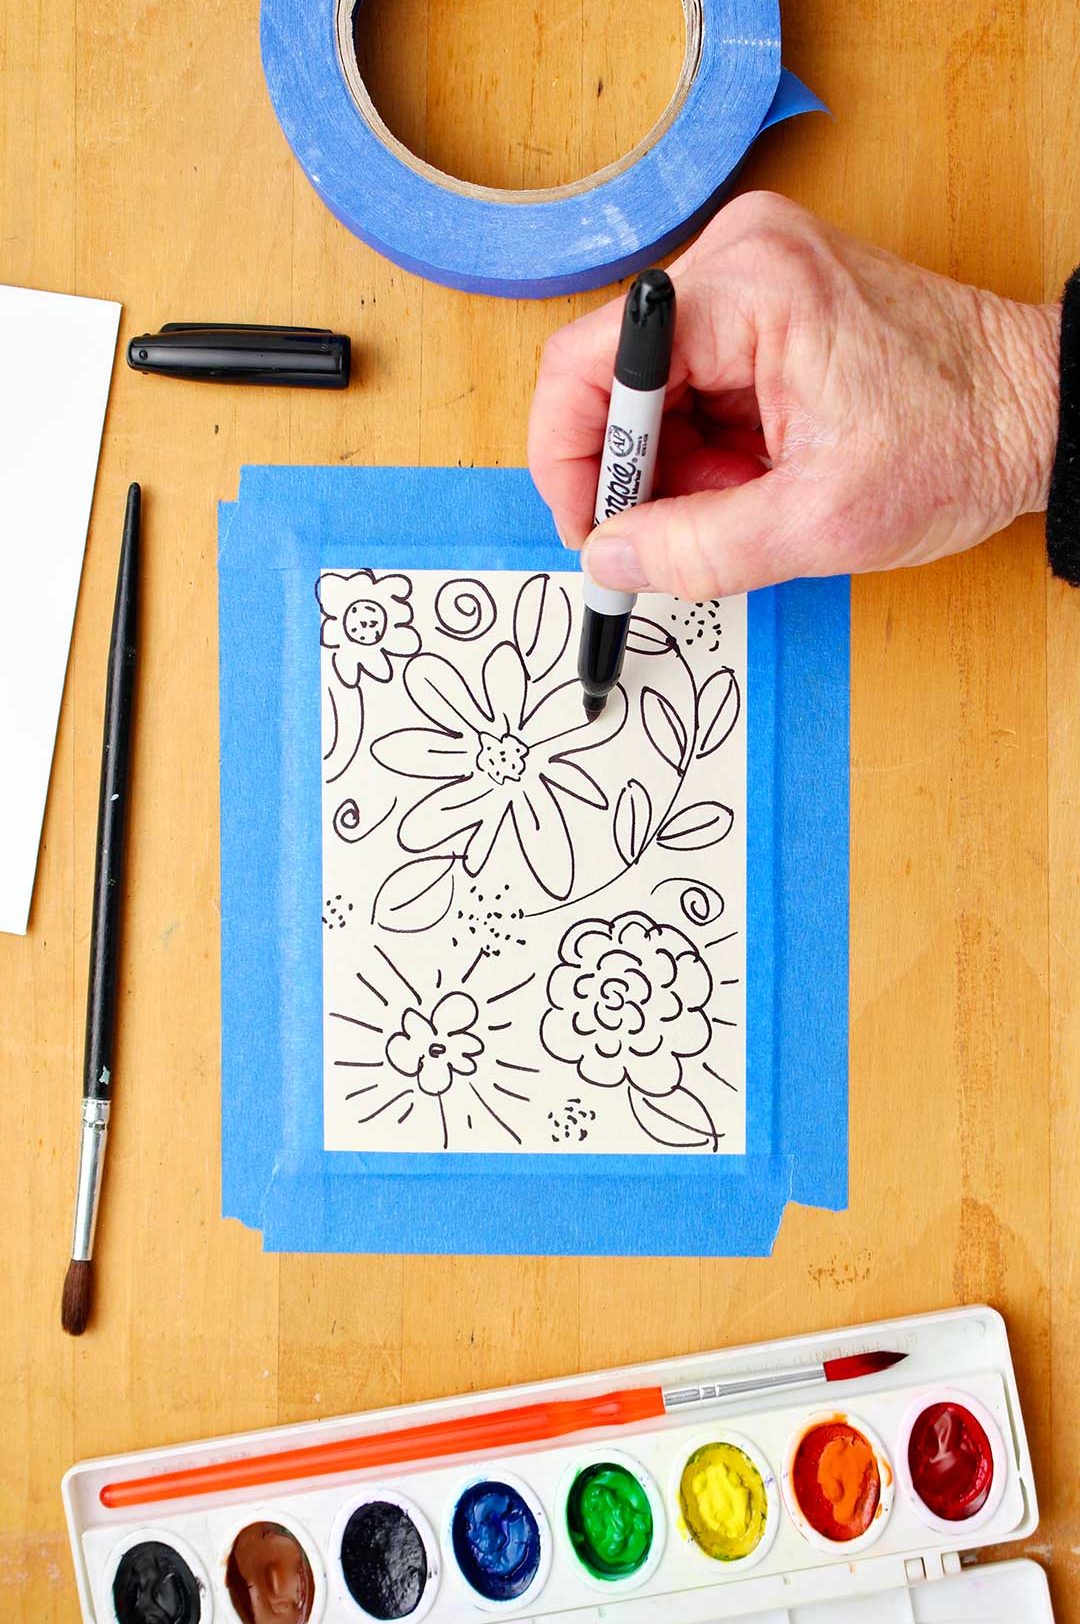 Hand drawing flowers and leaves with a black Sharpie marker on a wooden table with watercolor supplies near by.